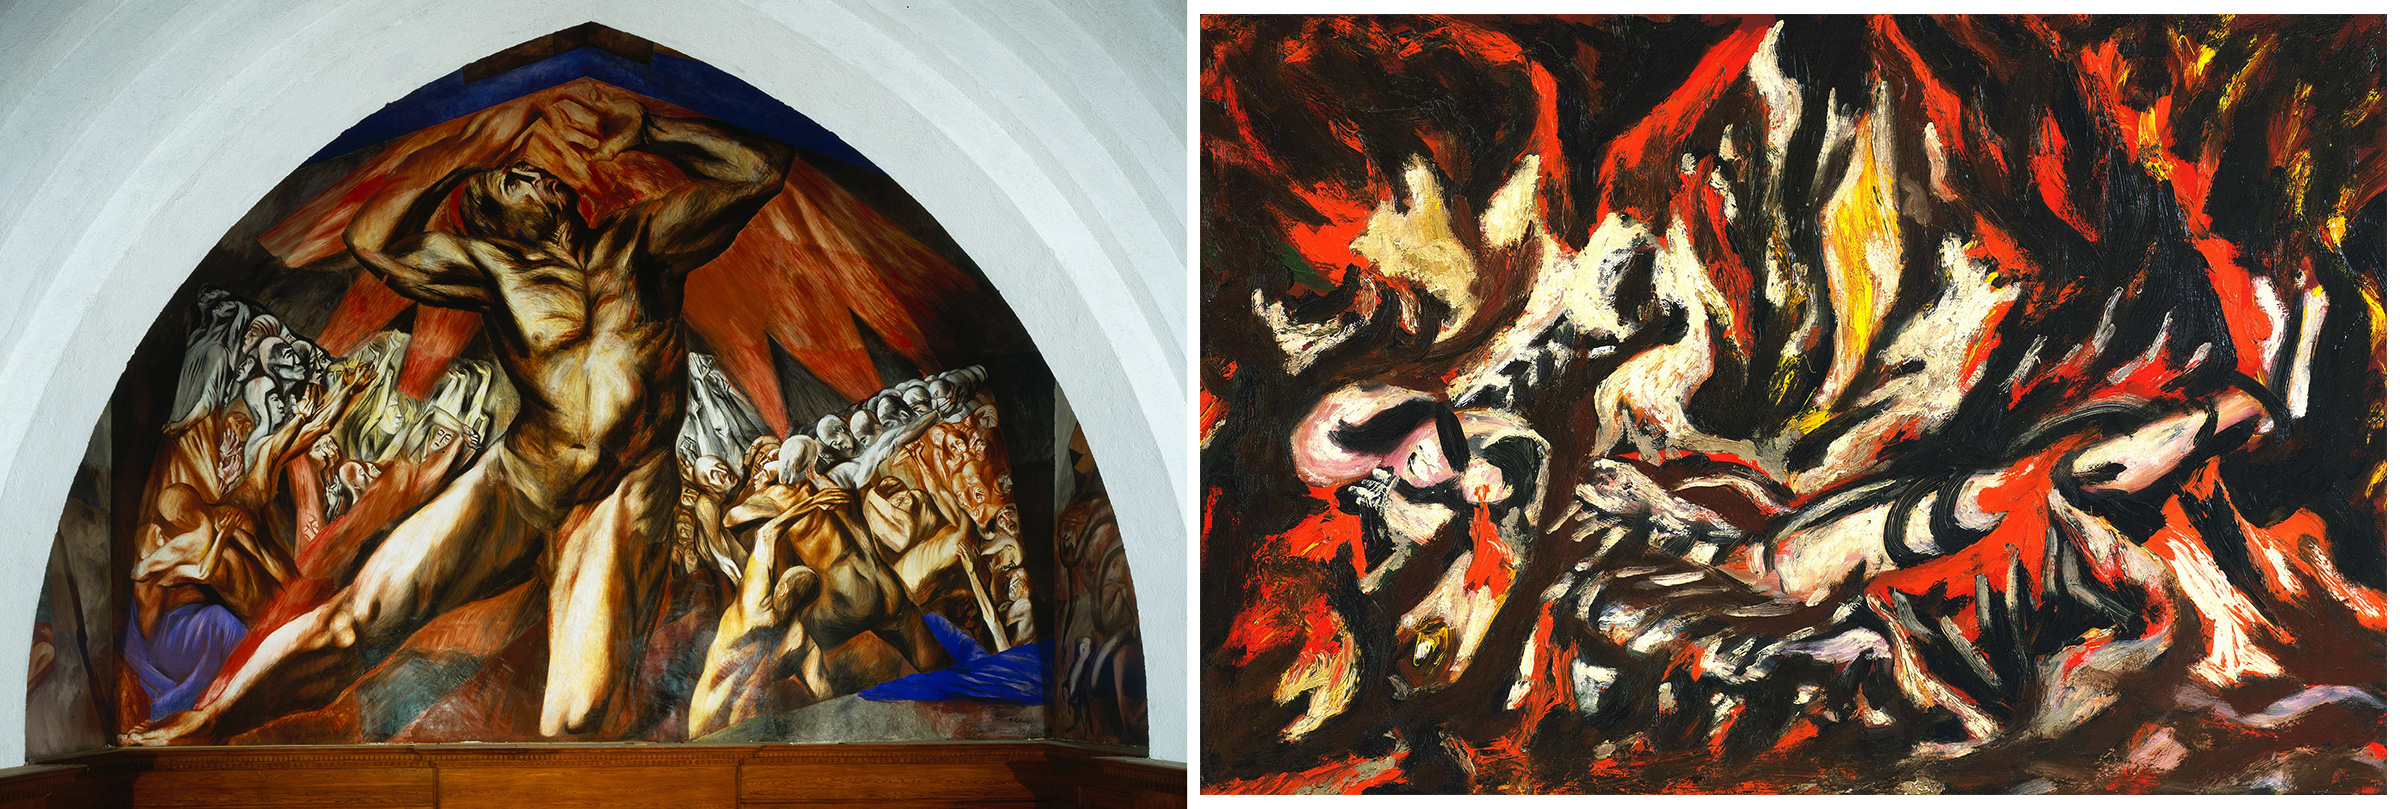 Left: José Clemente Orozco, Reproduction of Prometheus, 1930; Right: Jackson Pollock, The Flame , 1934–38 (Artists Rights Society (ARS)/SOMAAP; The Pollock-Krasner Foundation/Artists Rights Society (ARS). Image: The Museum of Modern Art/SCALA/Art Resource)